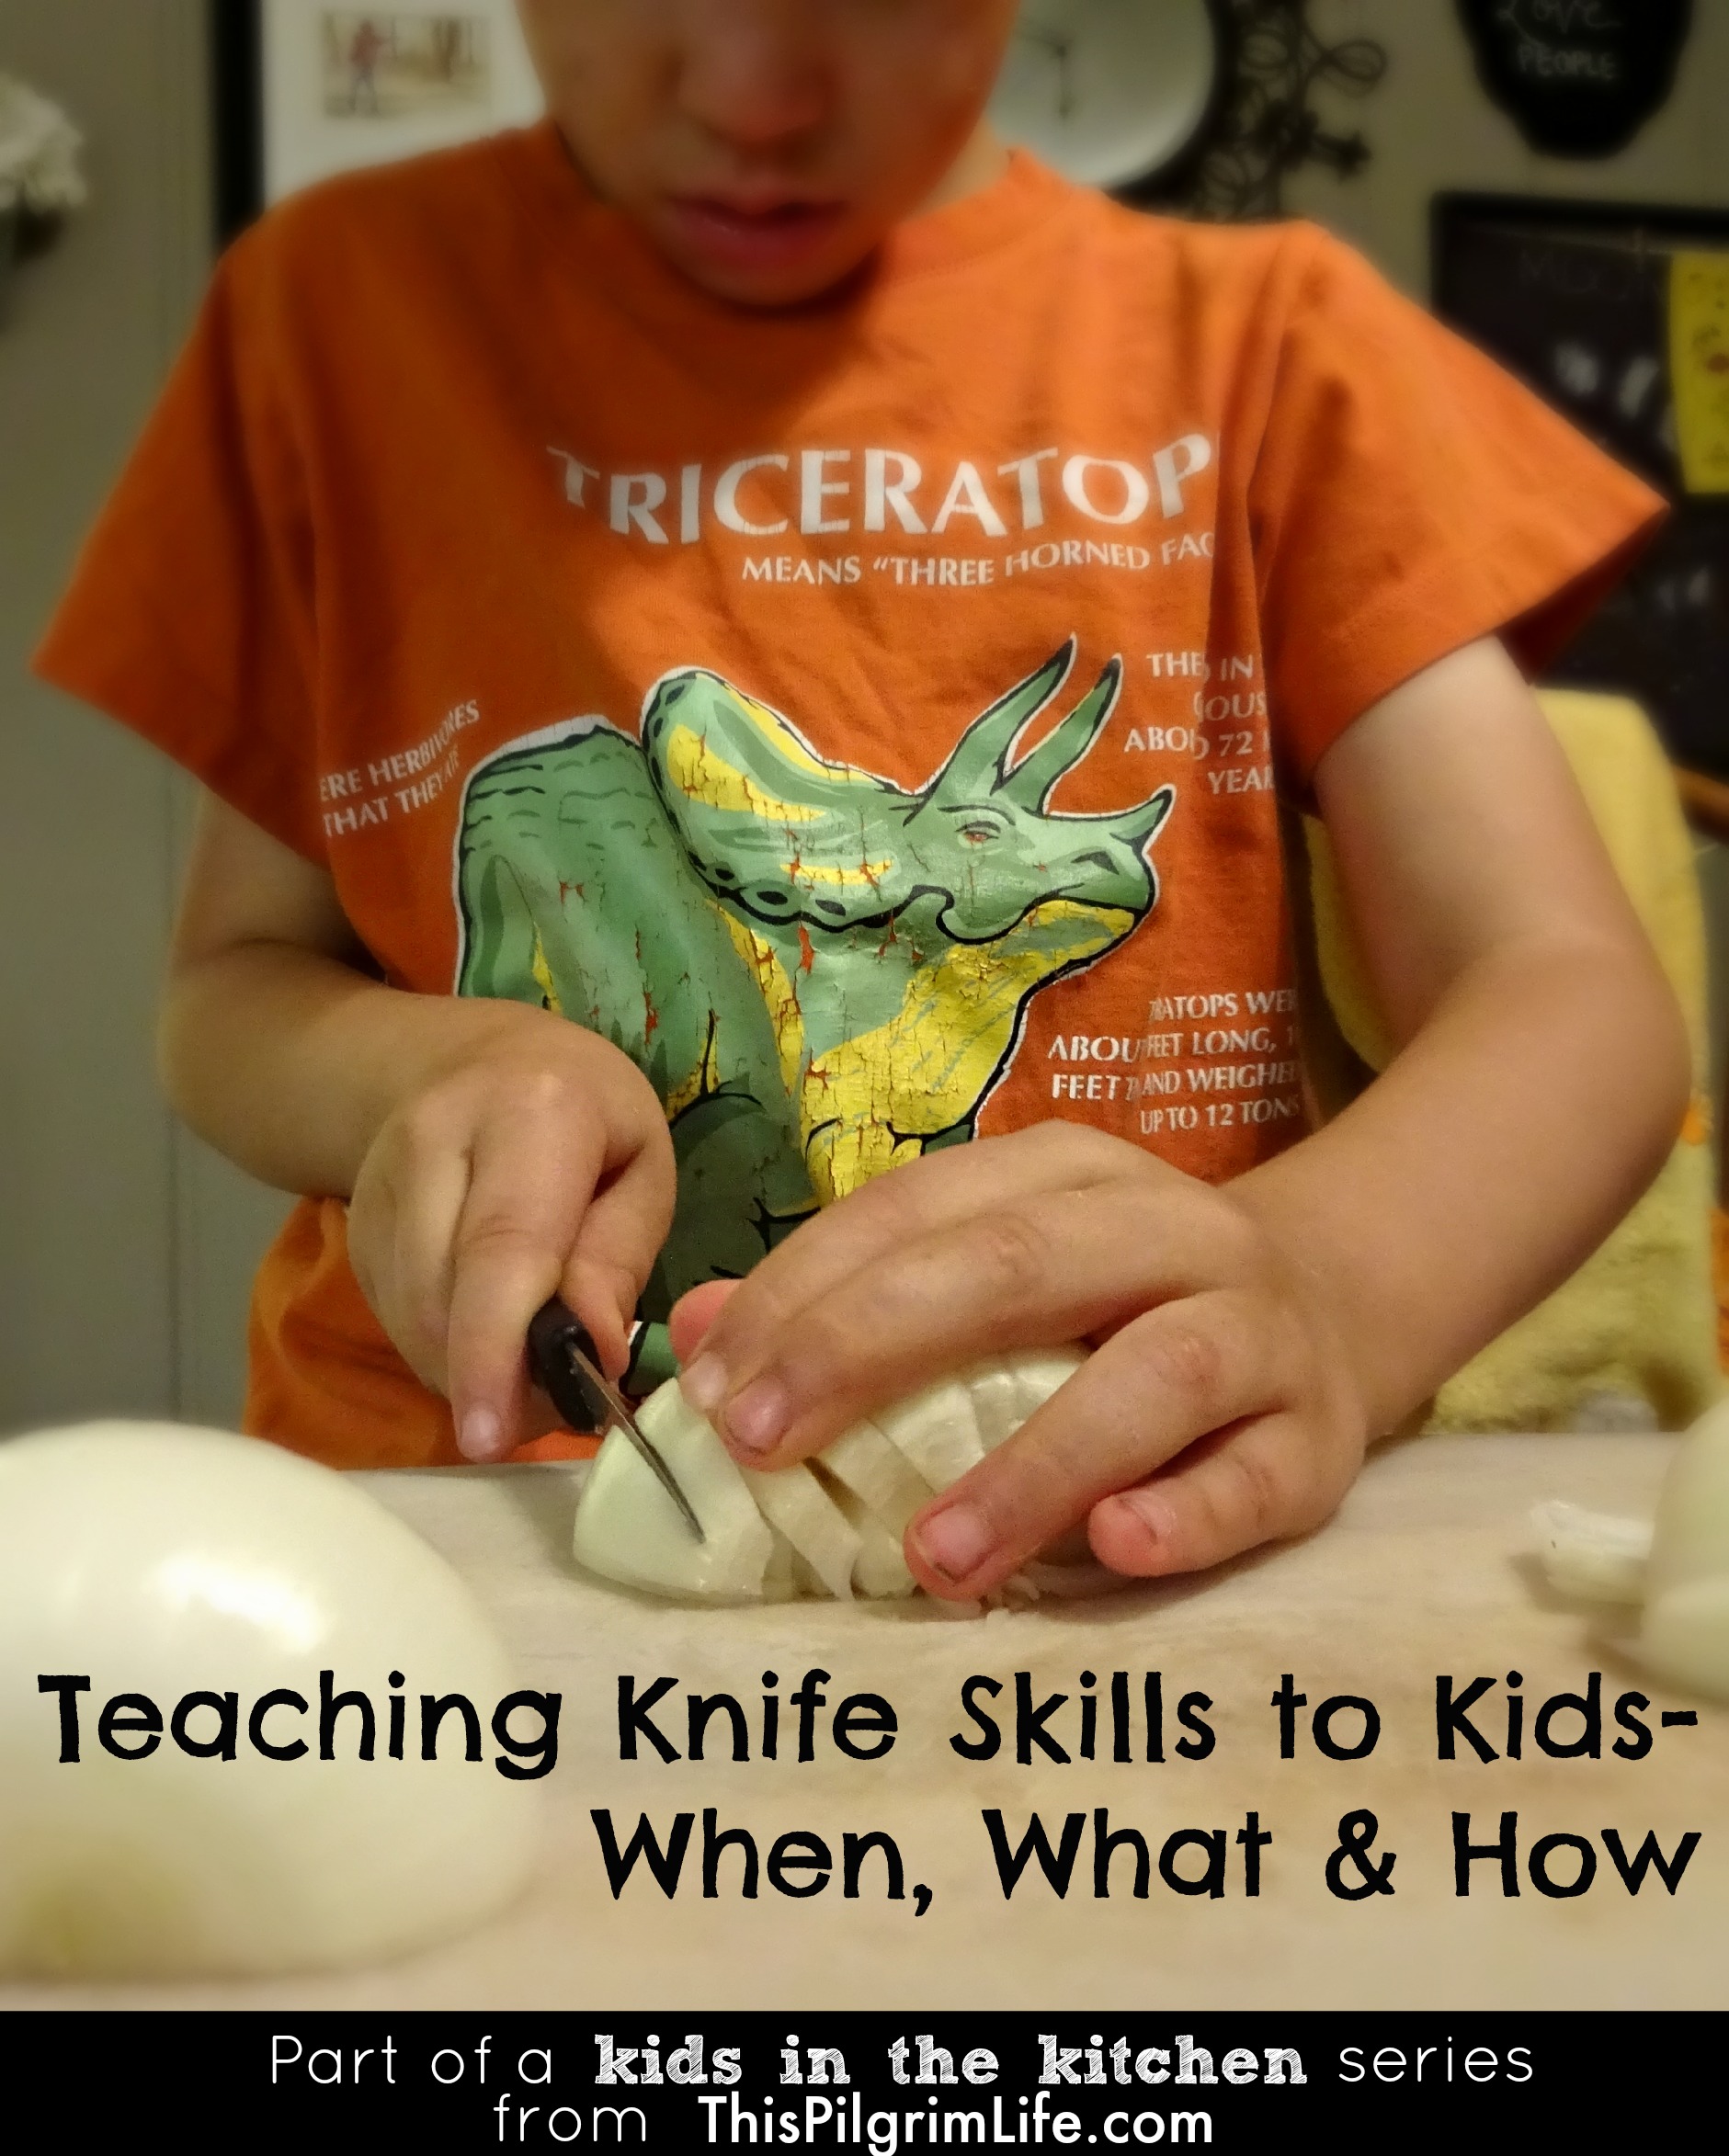 Teaching Knife Skills to Kids- When, What & How